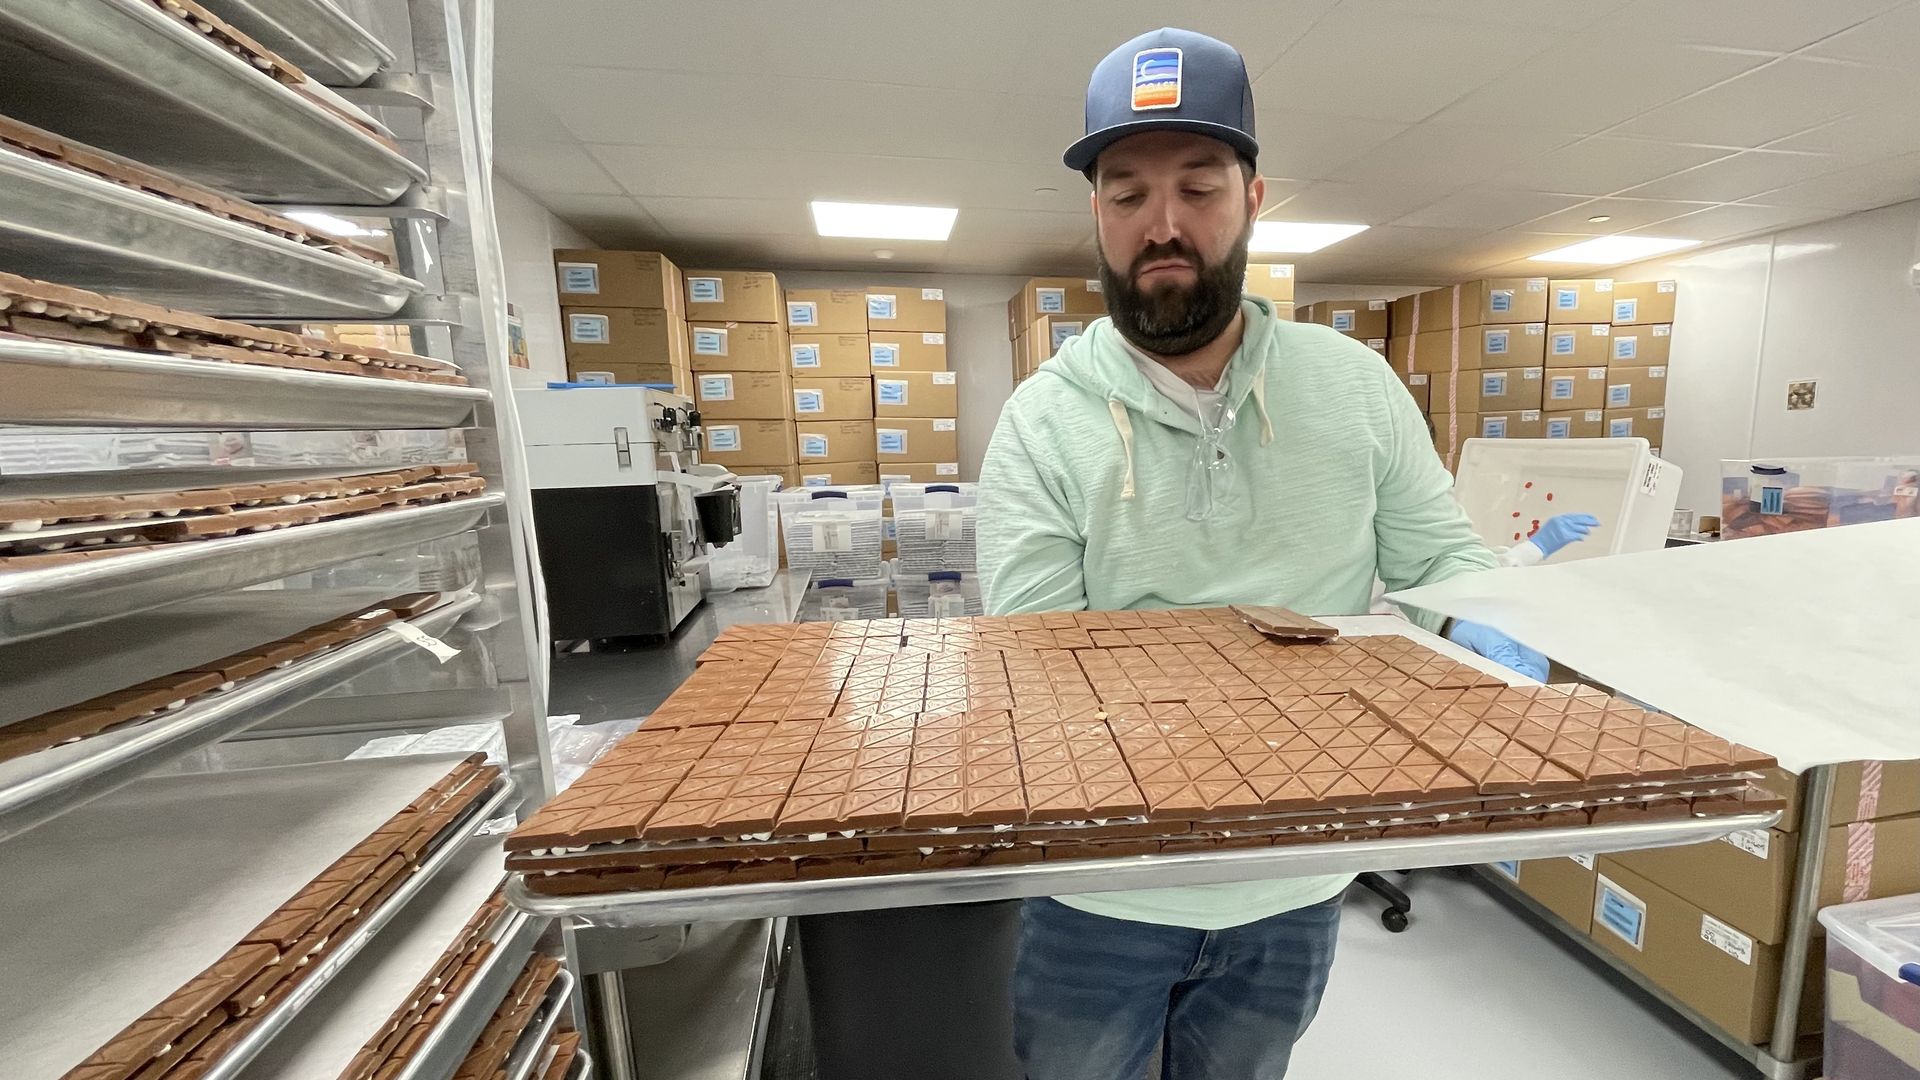 Co-owner Brian Cusnick holds out a large tray full of cannabis-infused s'mores chocolate bars in the Coast Cannabis facility.